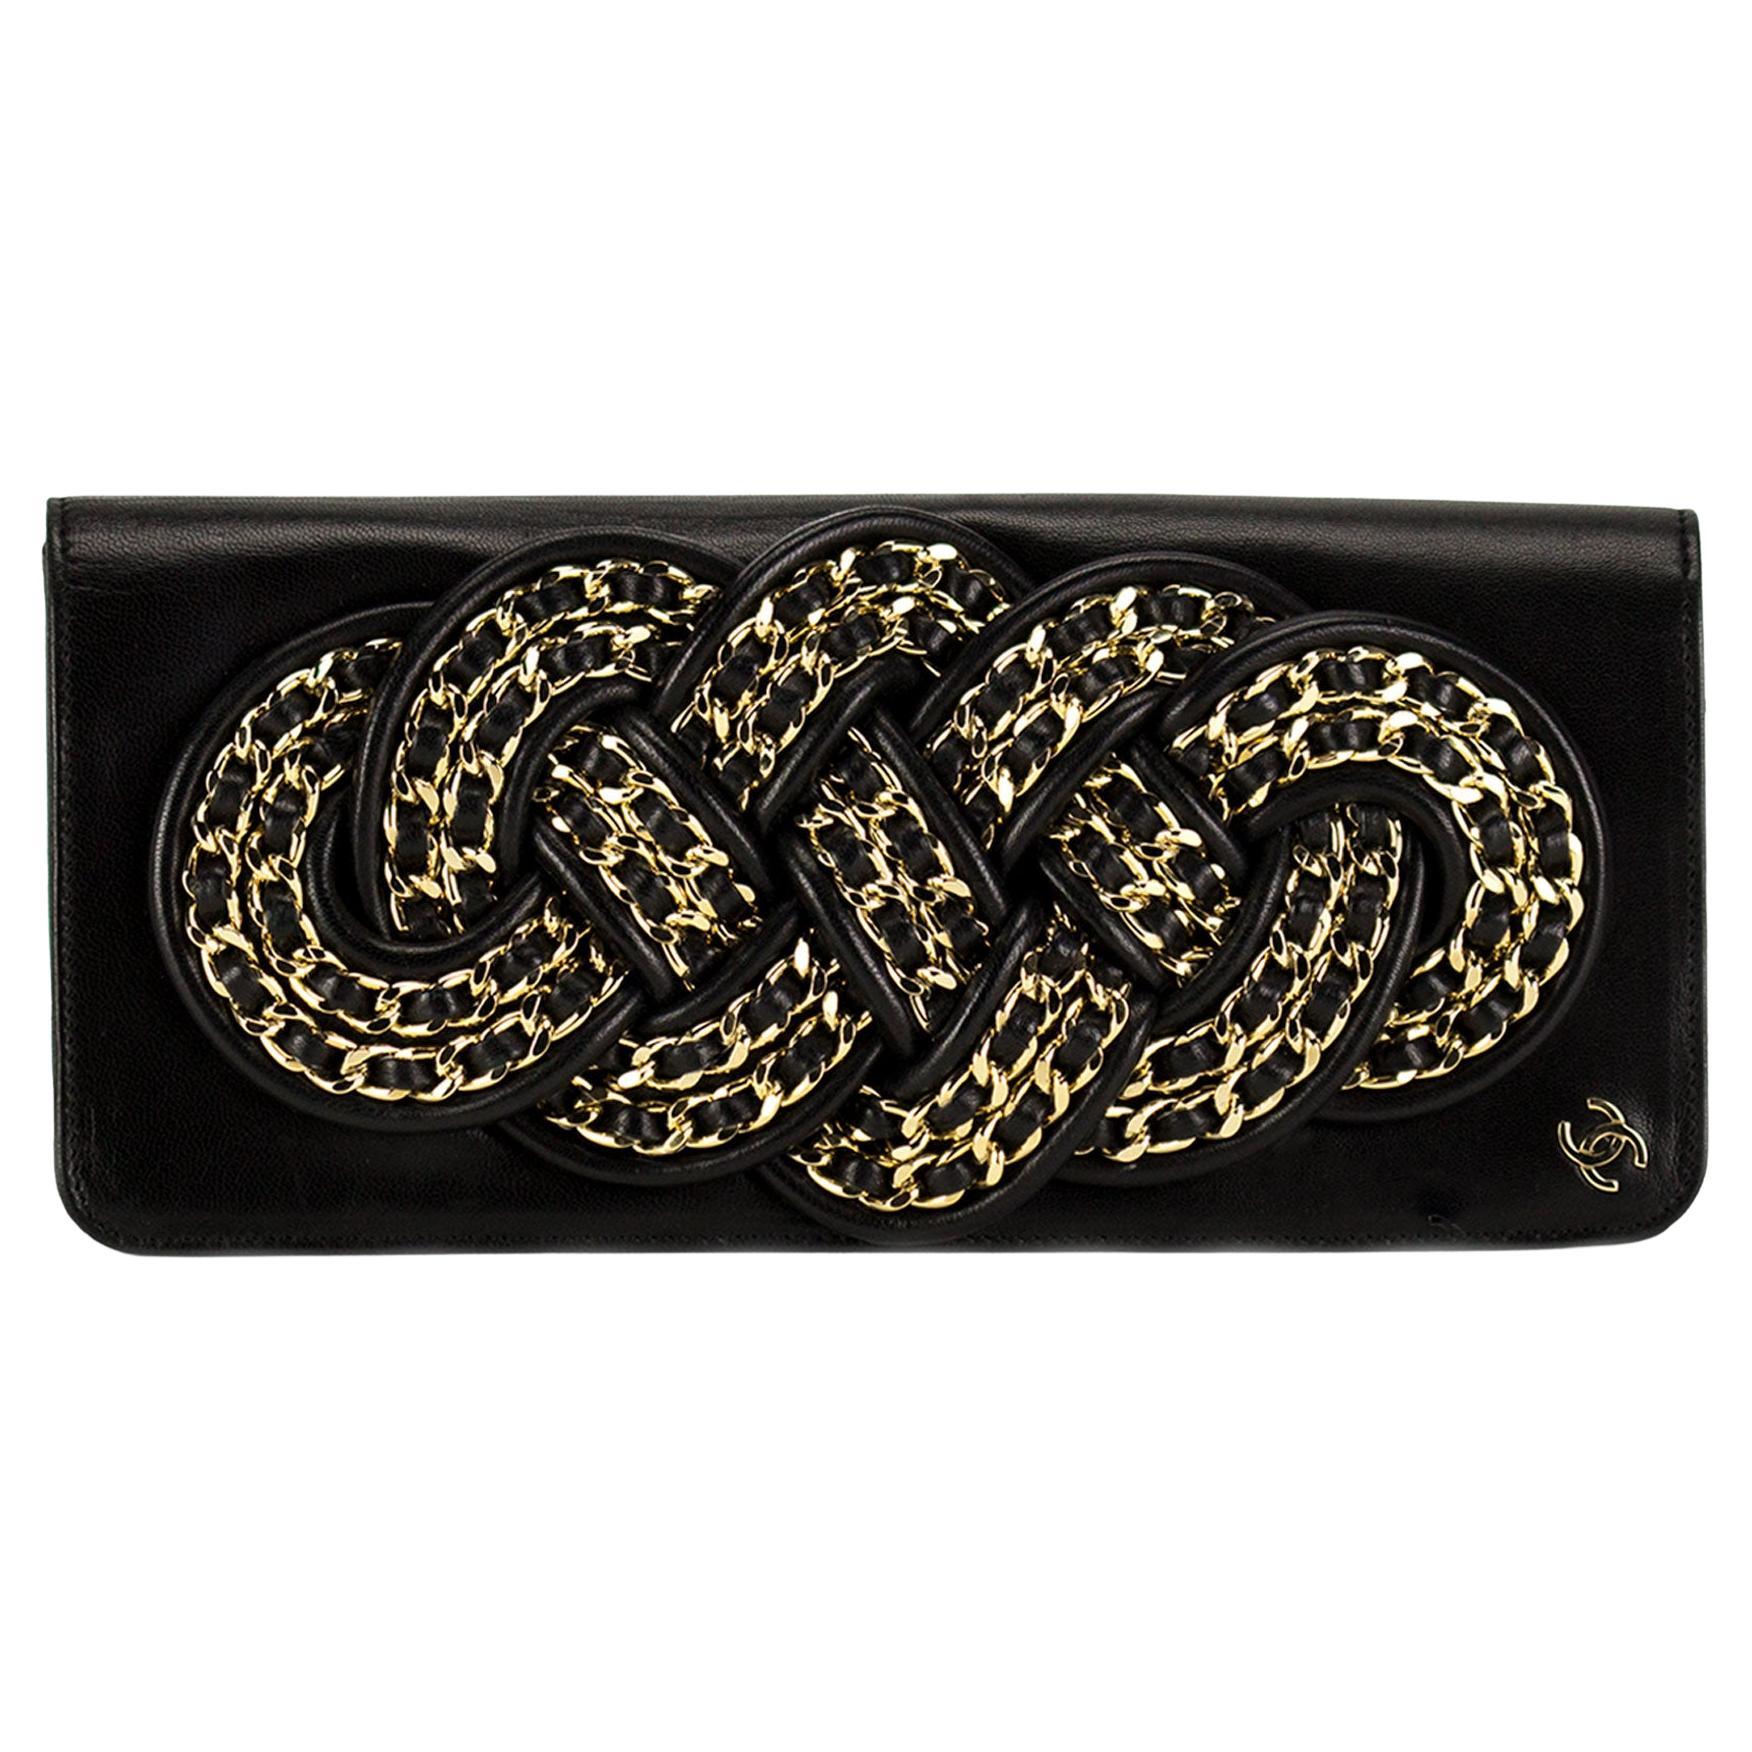 Chanel 2008 Gold Twisted Iconic Chain Braided Knotted Rare Black Lambskin Clutch For Sale